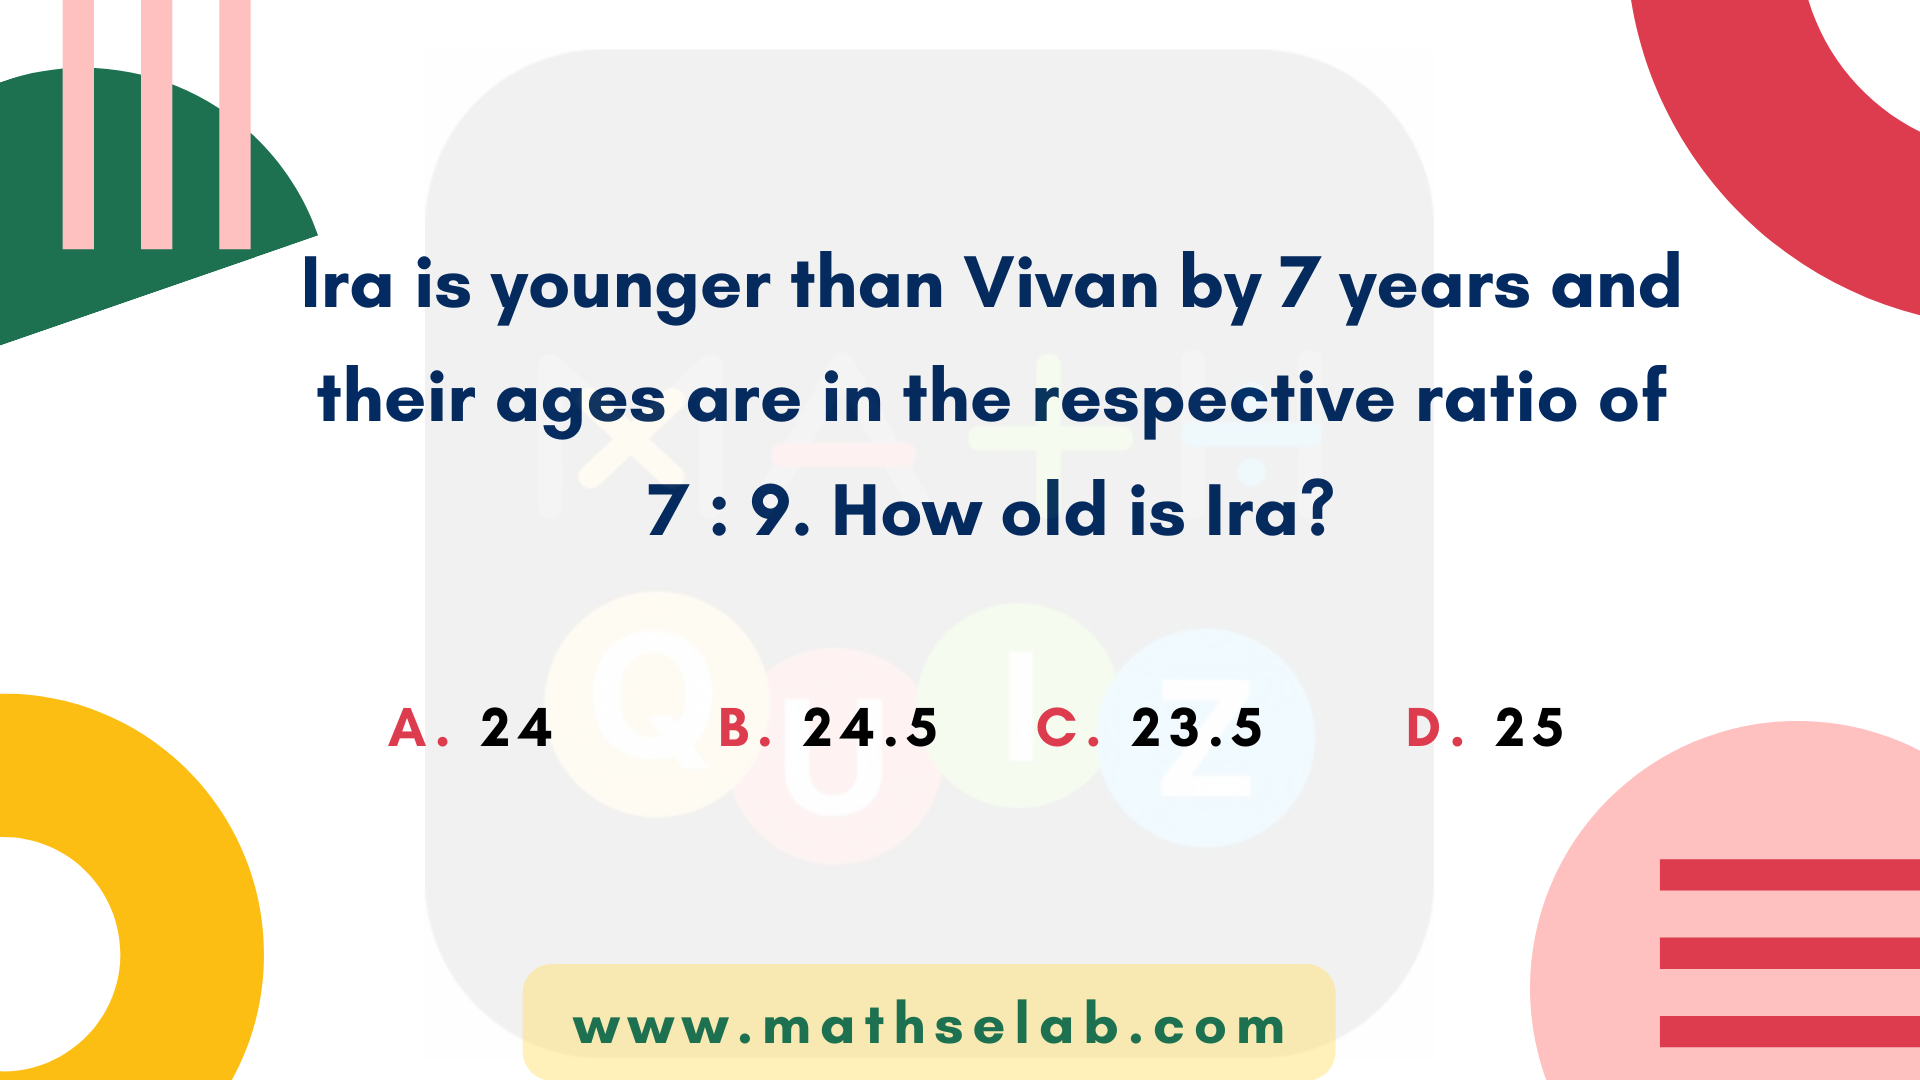 Ira is younger than Vivan by 7 years and their ages are in the respective ratio of 7 : 9. How old is Ira?